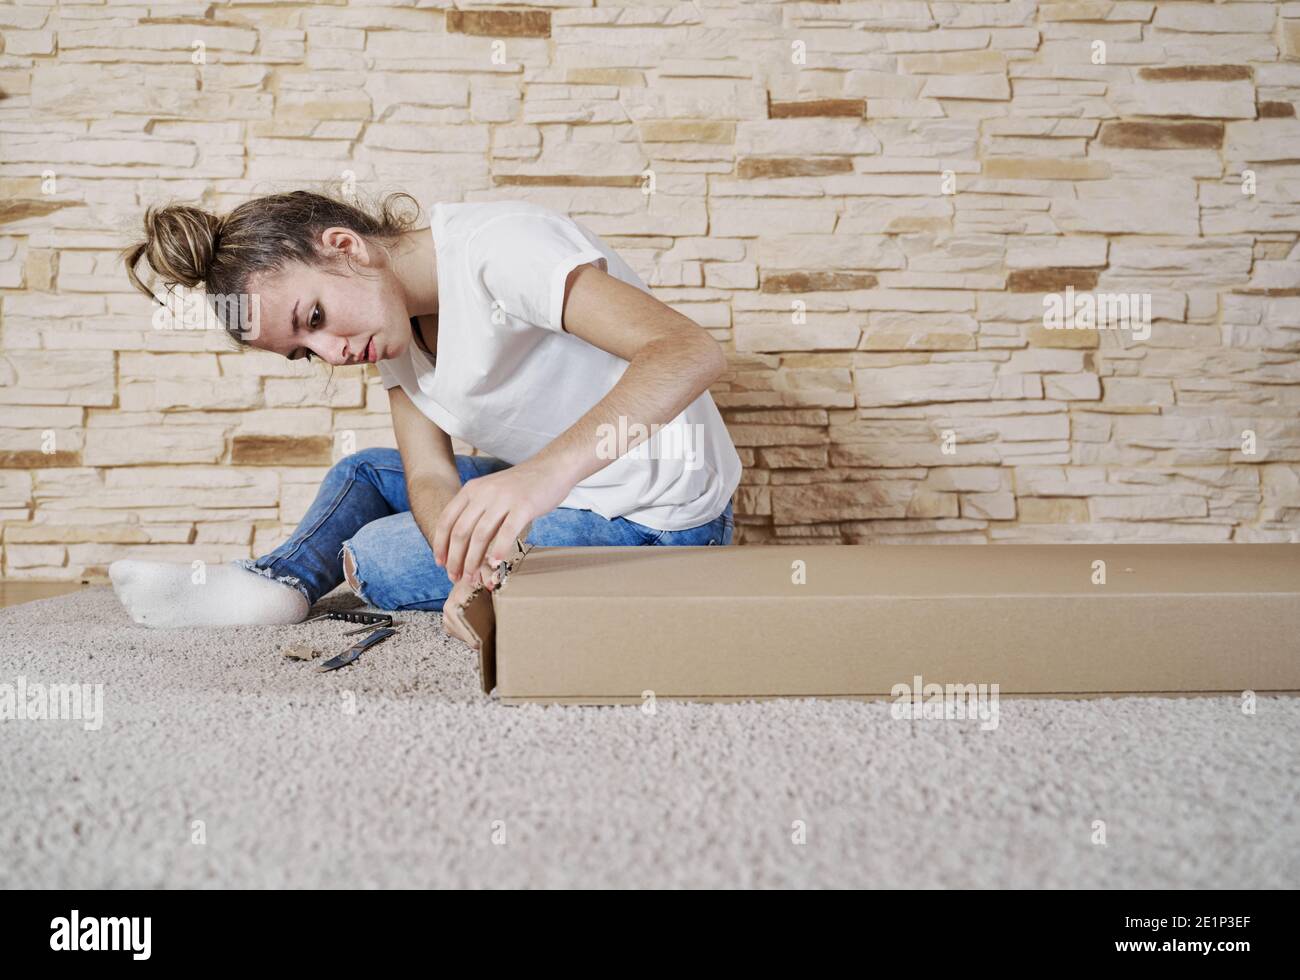 front view of girl opening a paperboard box with a knife. The box is on the floor and the woman sitting. Horizontal photo Stock Photo